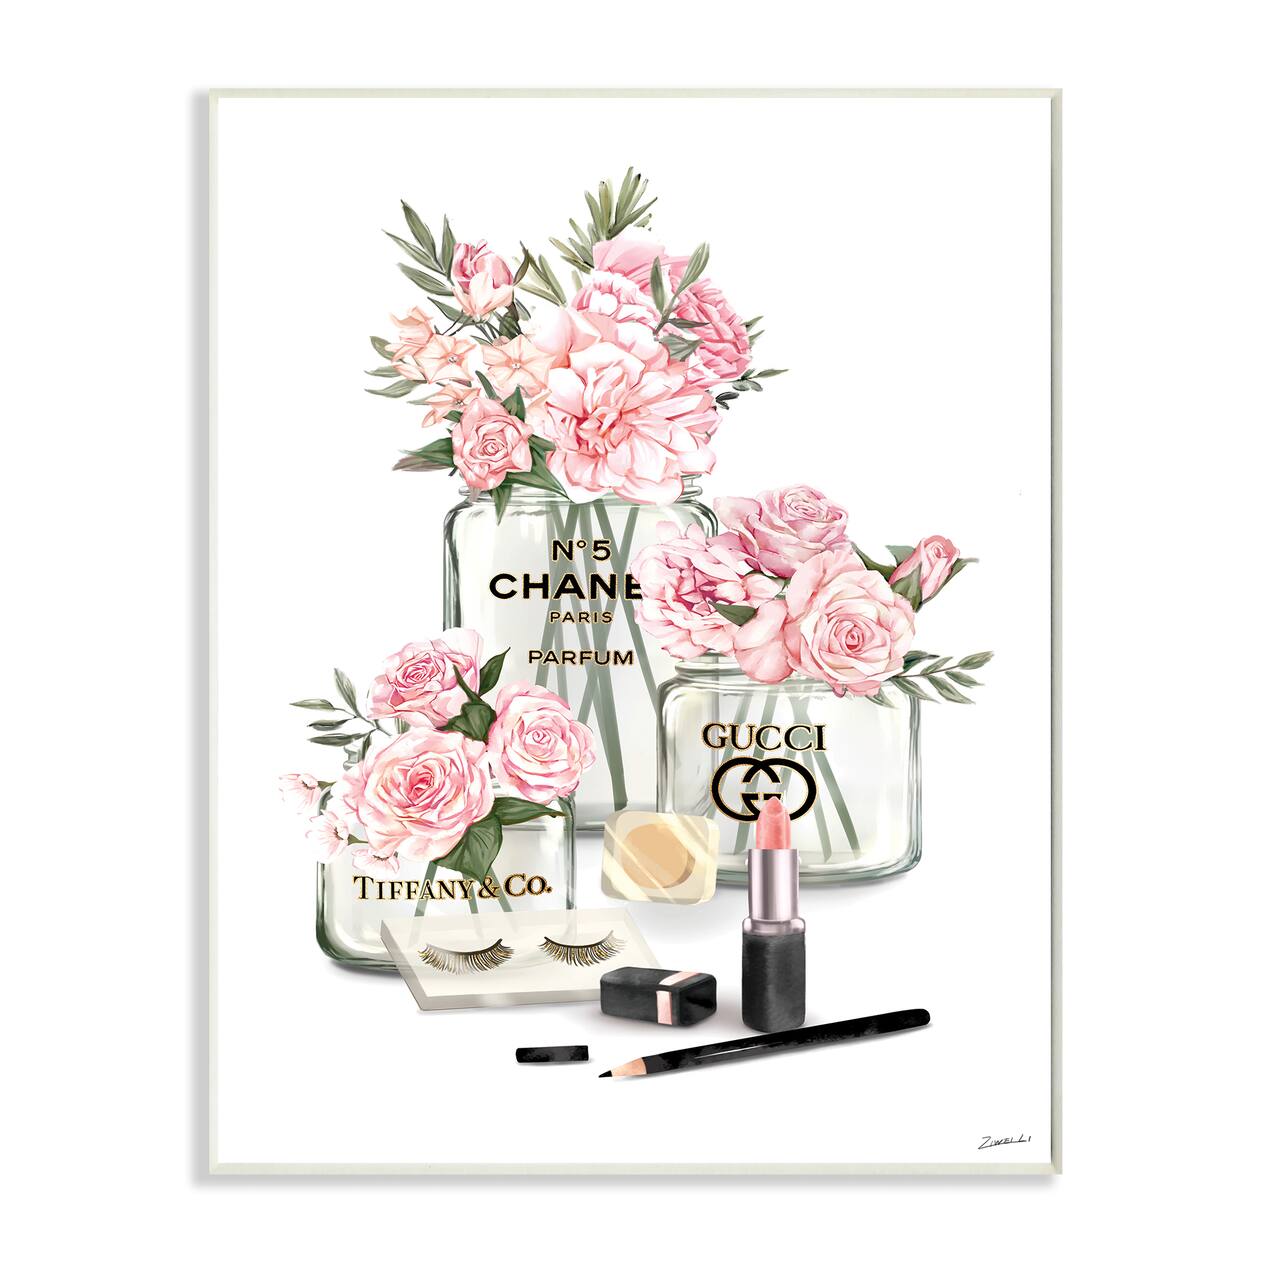 Stupell Industries Pink Rose Florals in Glam Fashion Jars Wood Wall Plaque